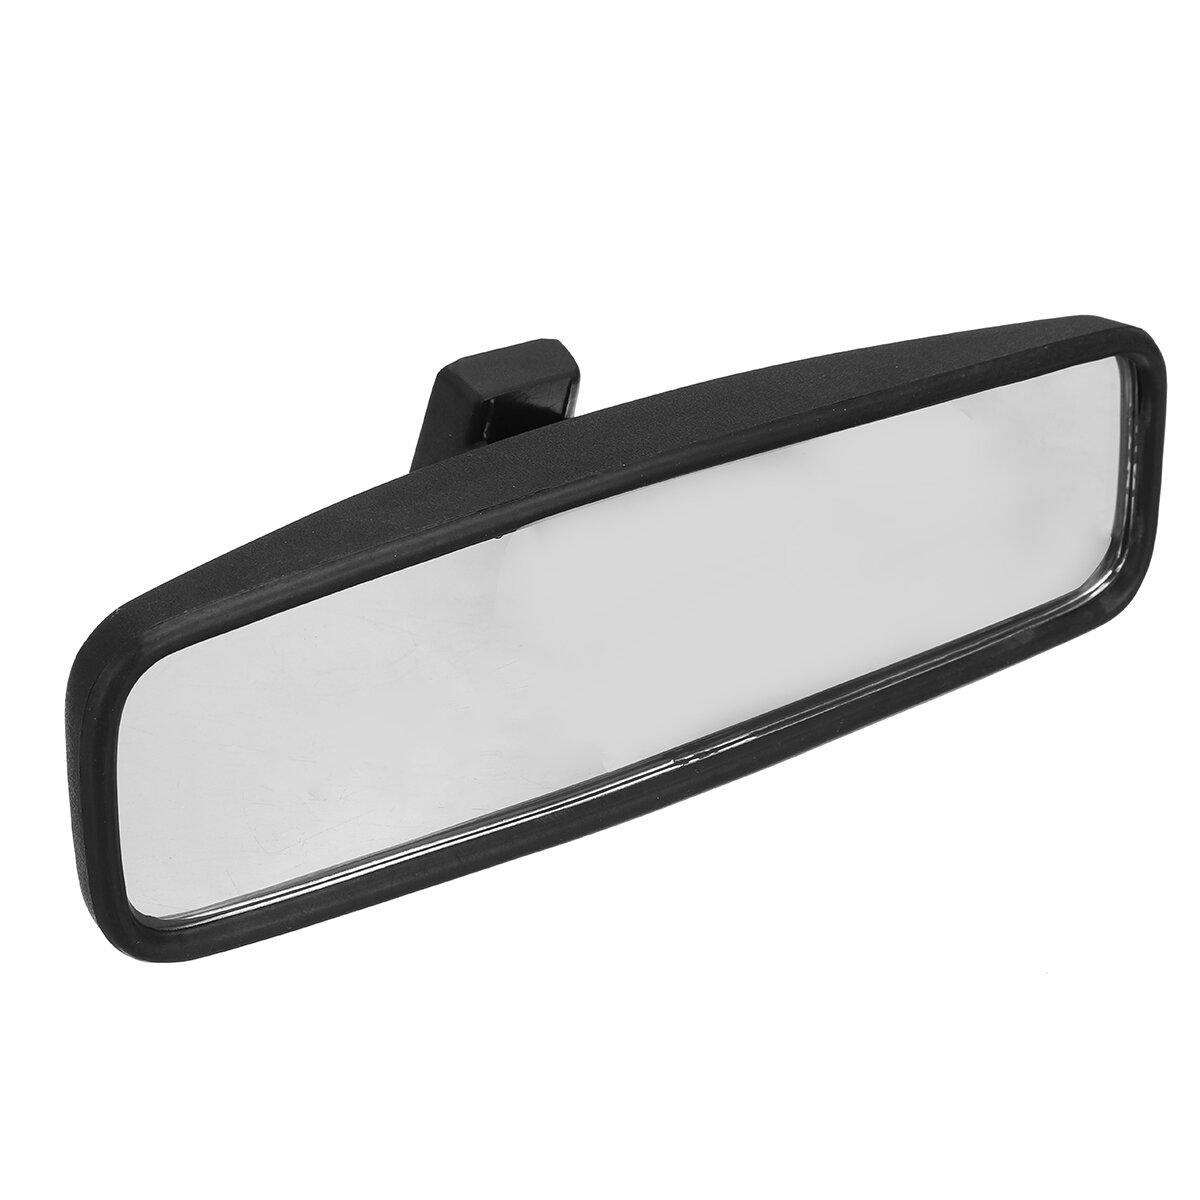 Interior Rear View Mirror Glass Car Wide Flat For Peugeot 106 205 206 306 405